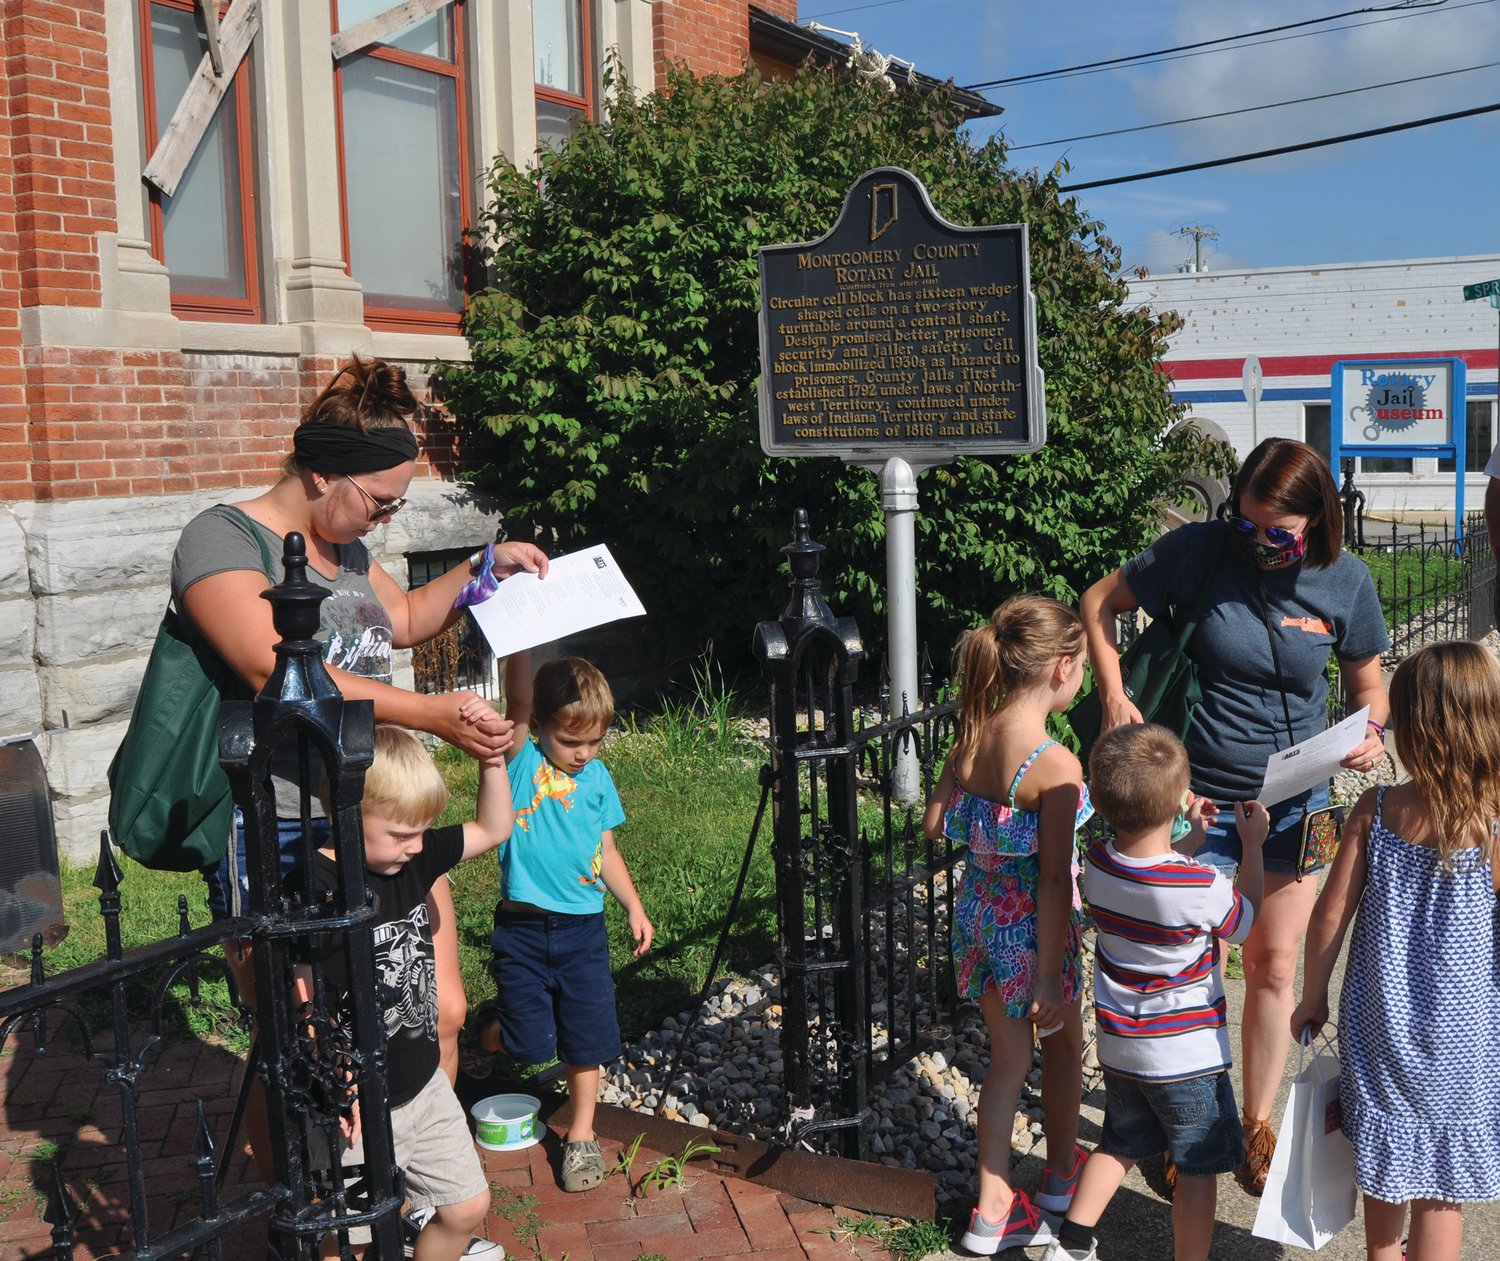 Chelsea Emberton, left, and Amber Wheeldon reach the Rotary Jail Museum with Kartyr, Kreed, Boston, Colt and Charlie during Athens Arts Gallery's Art Quest on Saturday in downtown Crawfordsville. Families followed riddle-like clues to collect prizes at downtown cultural attractions.